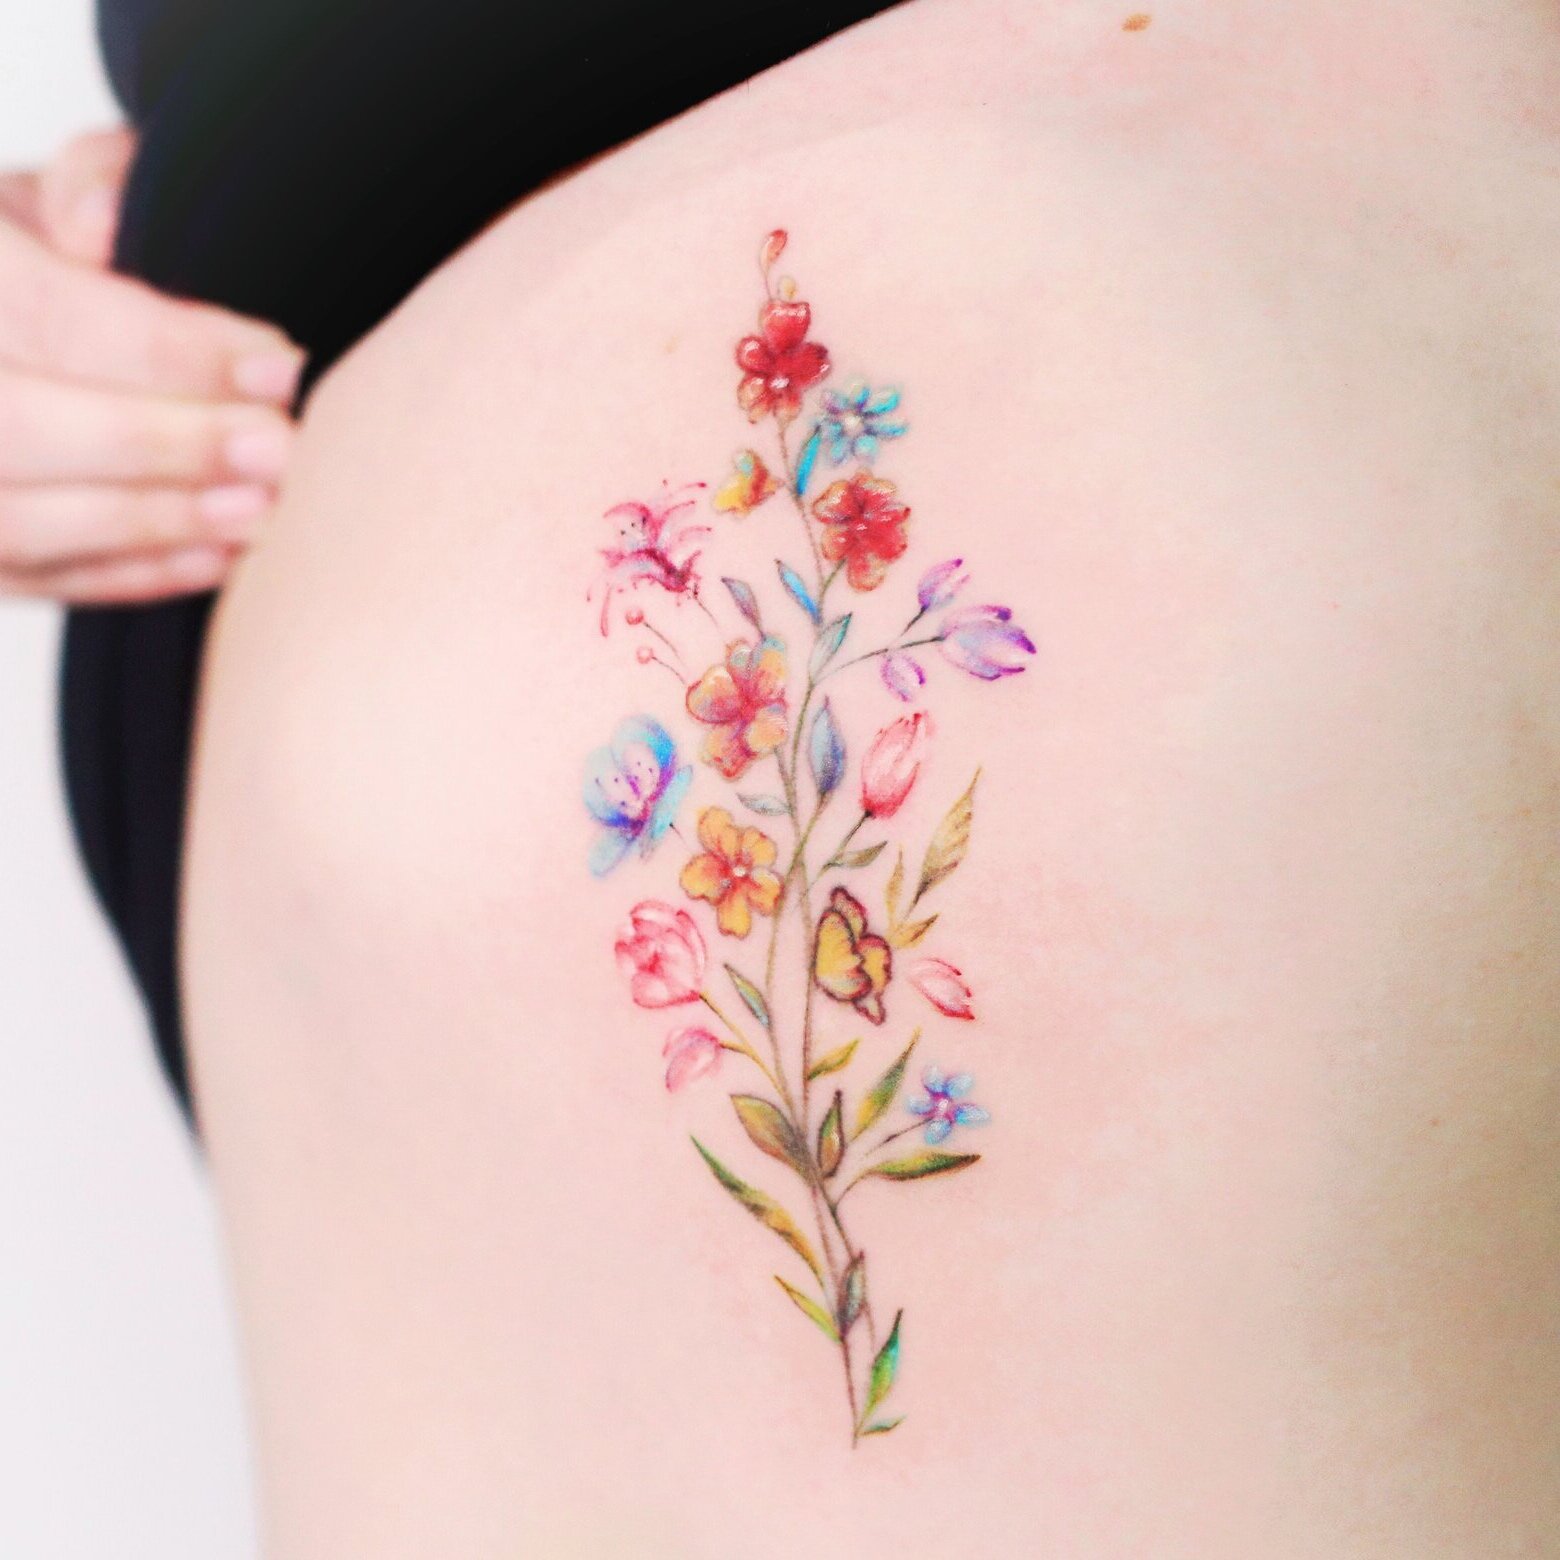 Watercolour flower tattoo by Nico